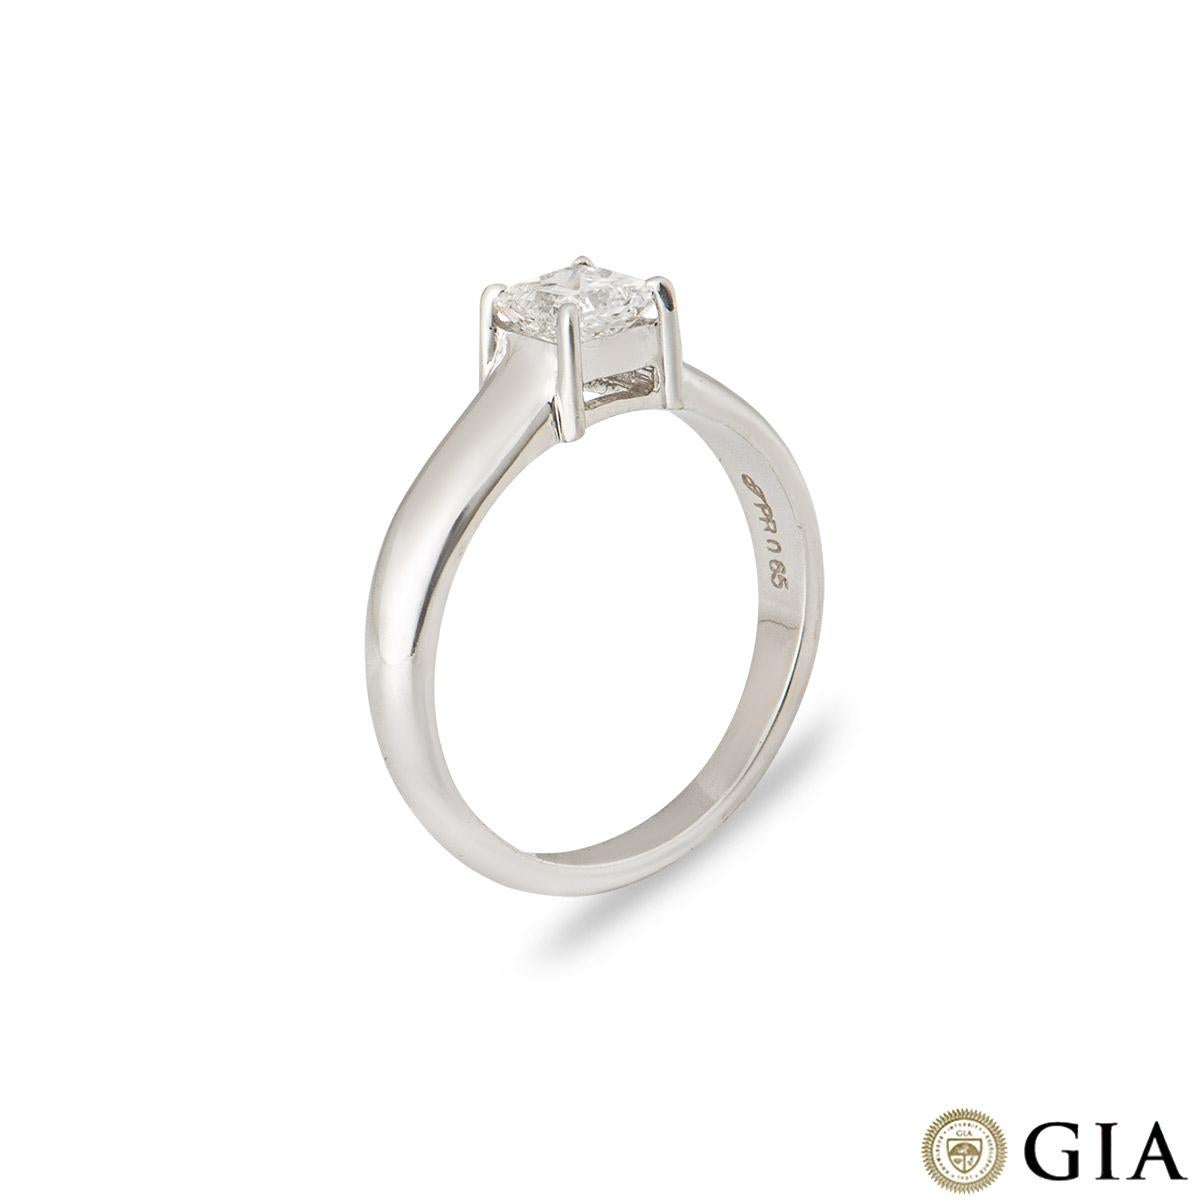 An elegant 18k white gold diamond engagement ring. The claw set princess cut diamond weighs 0.65ct, is F colour and VS1 in clarity. The diamond is set in a tapered band measuring 4mm at the widest point and 2mm at the back. The ring is currently a